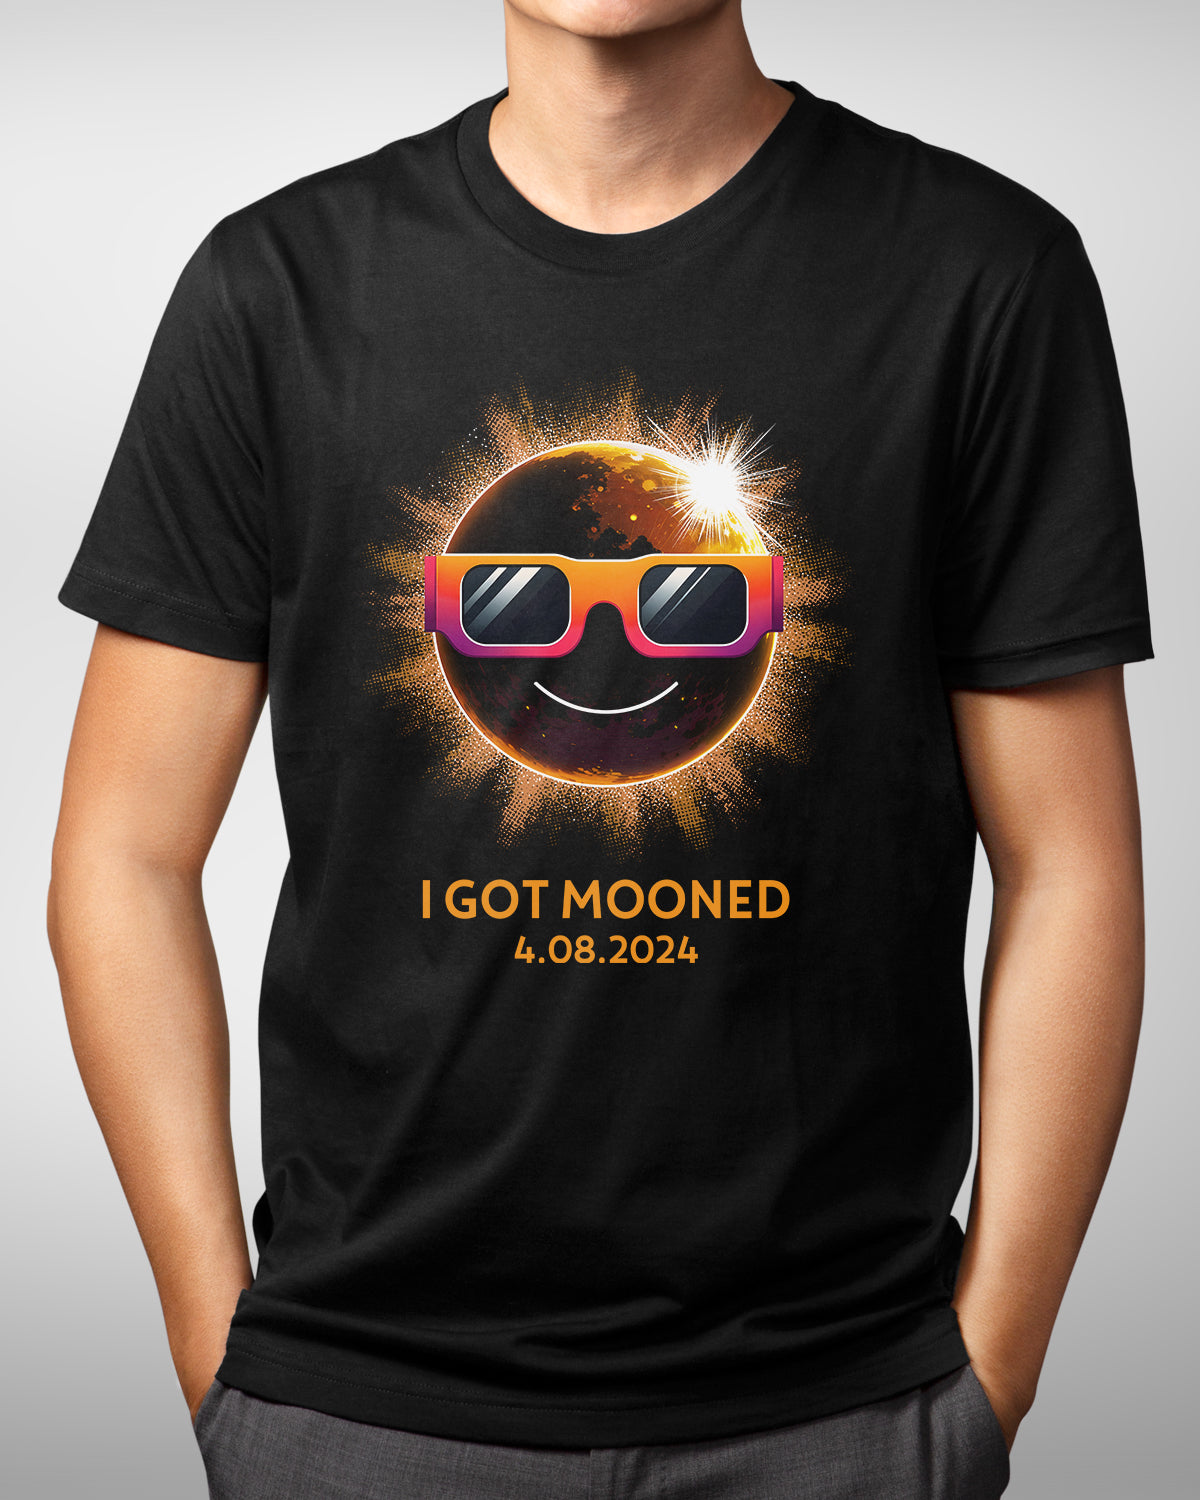 I Got Mooned Total Solar Eclipse 2024 Shirt, Funny Astronomy Tee, Eclipse Souvenir Gift, April 8 Solar Eclipse Viewer